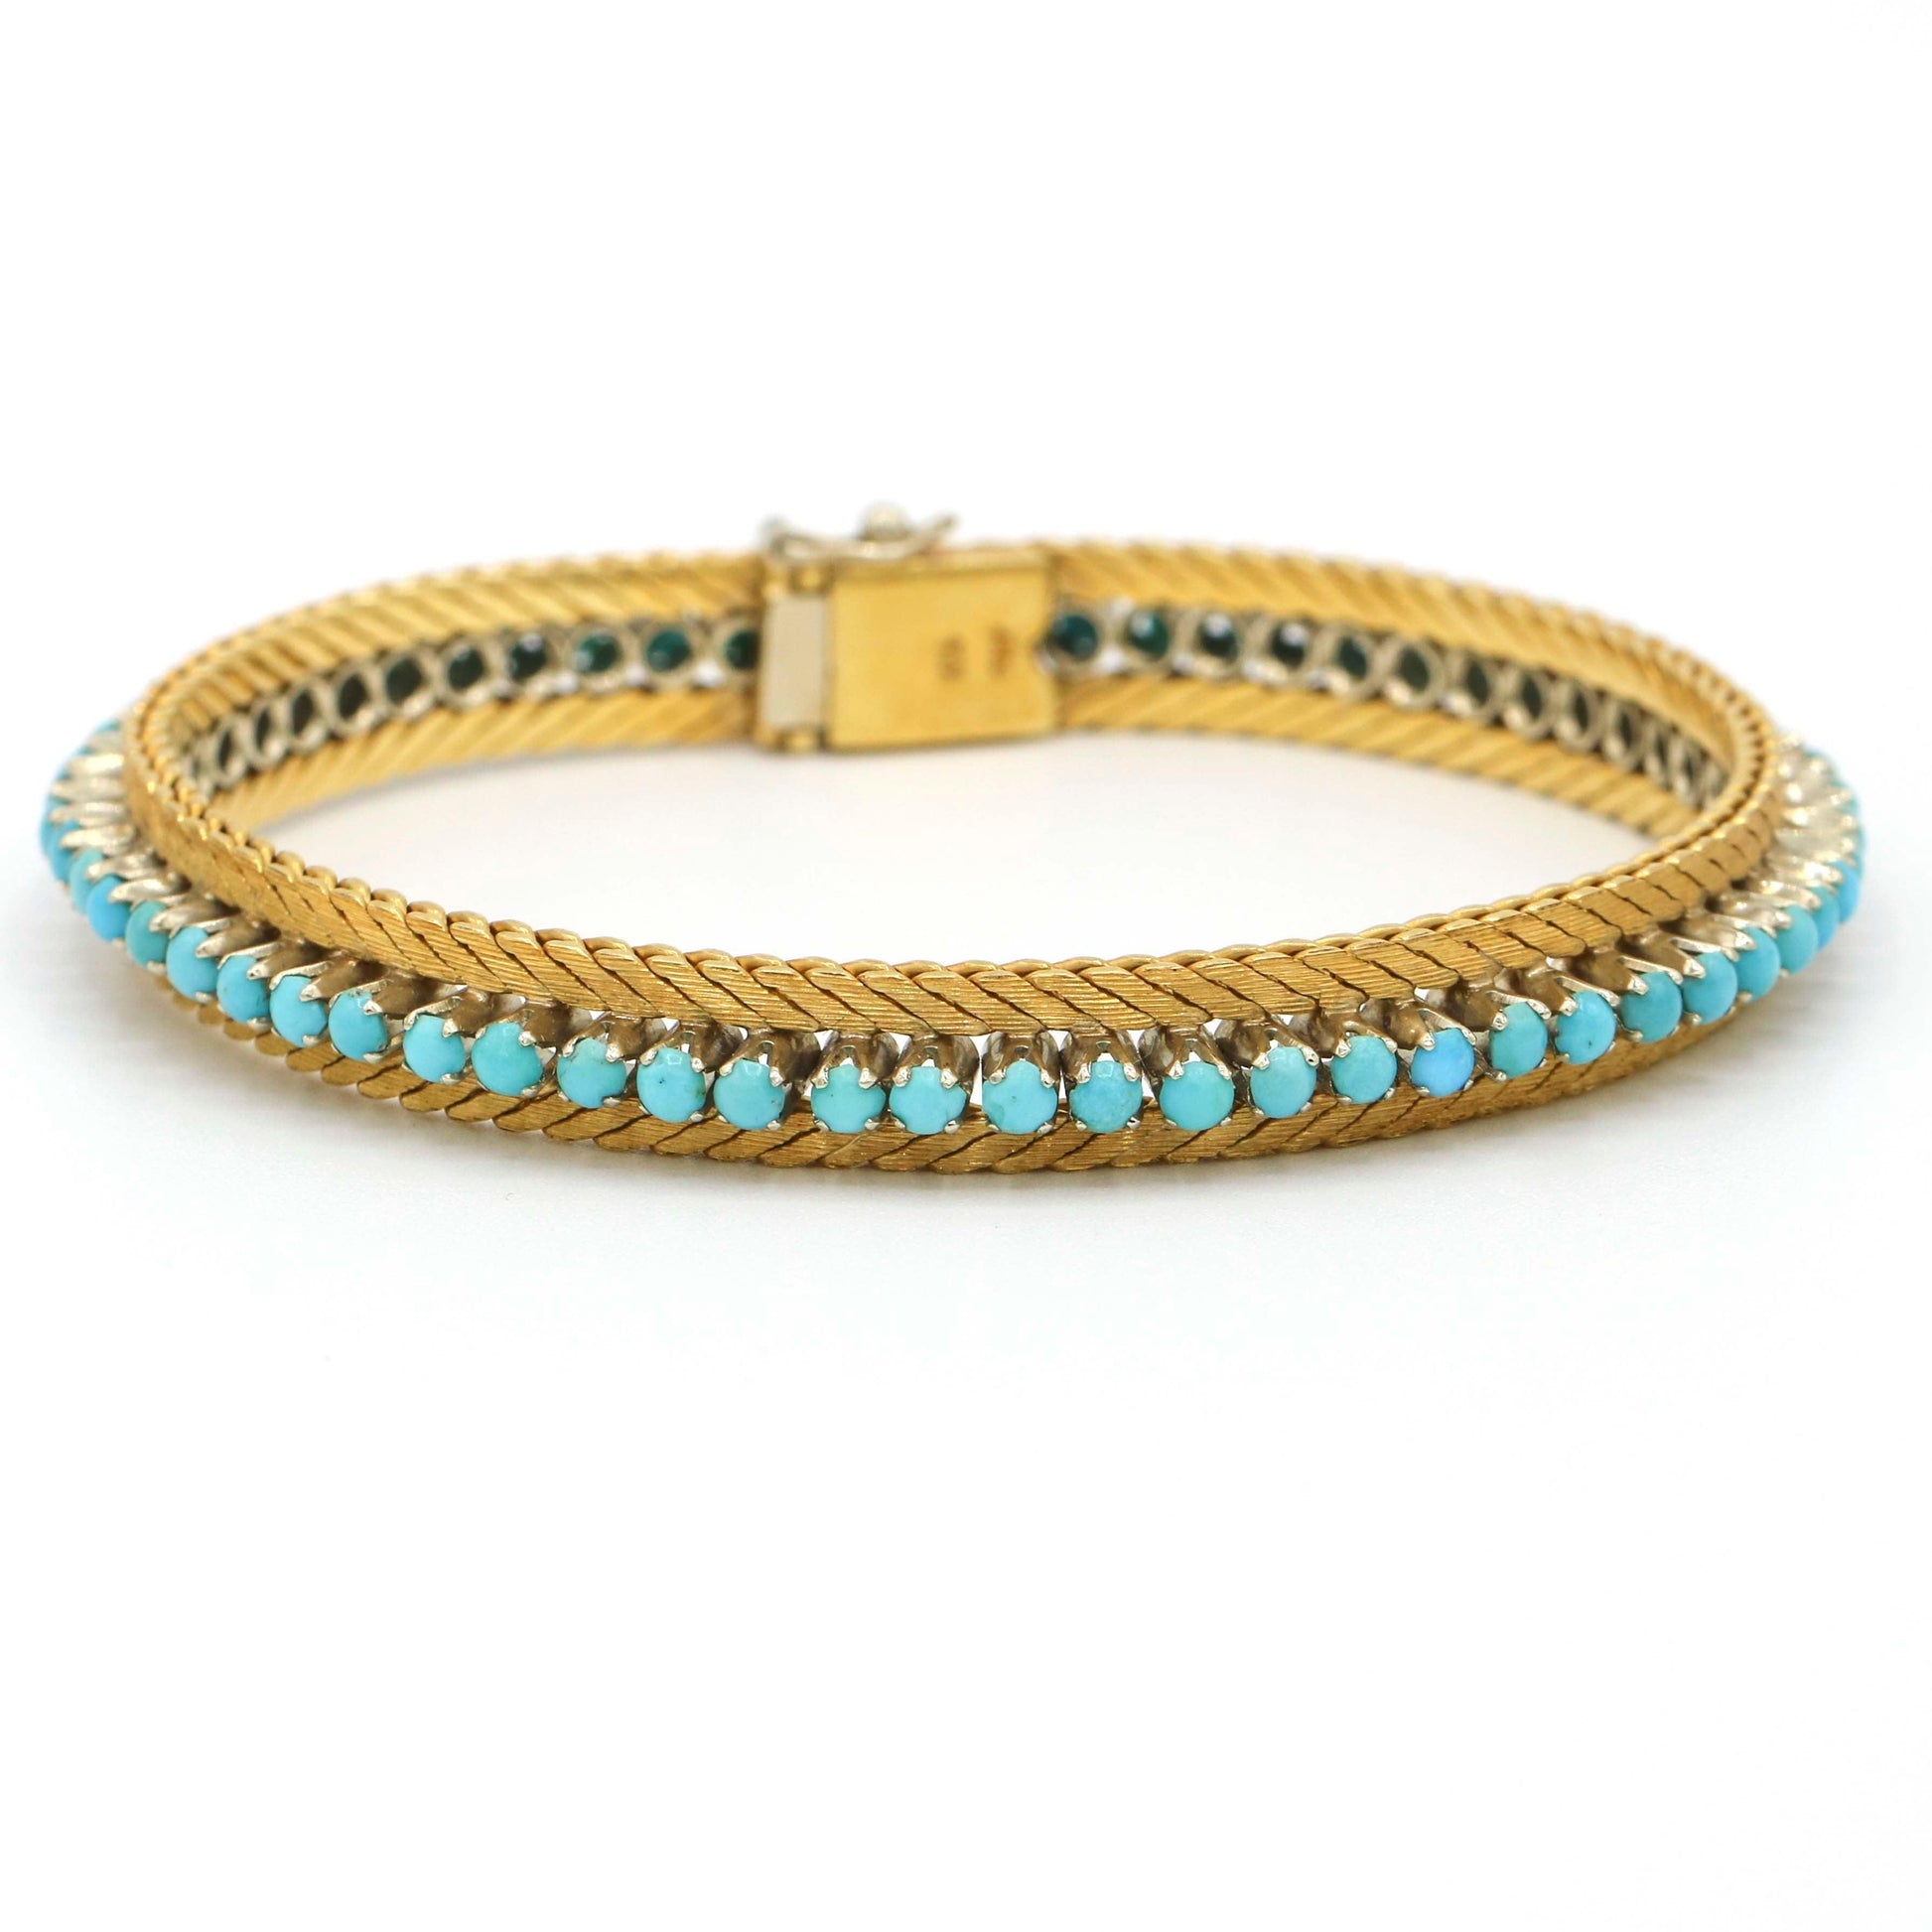 Women's Vintage Turquoise Textured Snake Chain Bracelet in 18k Yellow Gold - 31 Jewels Inc.